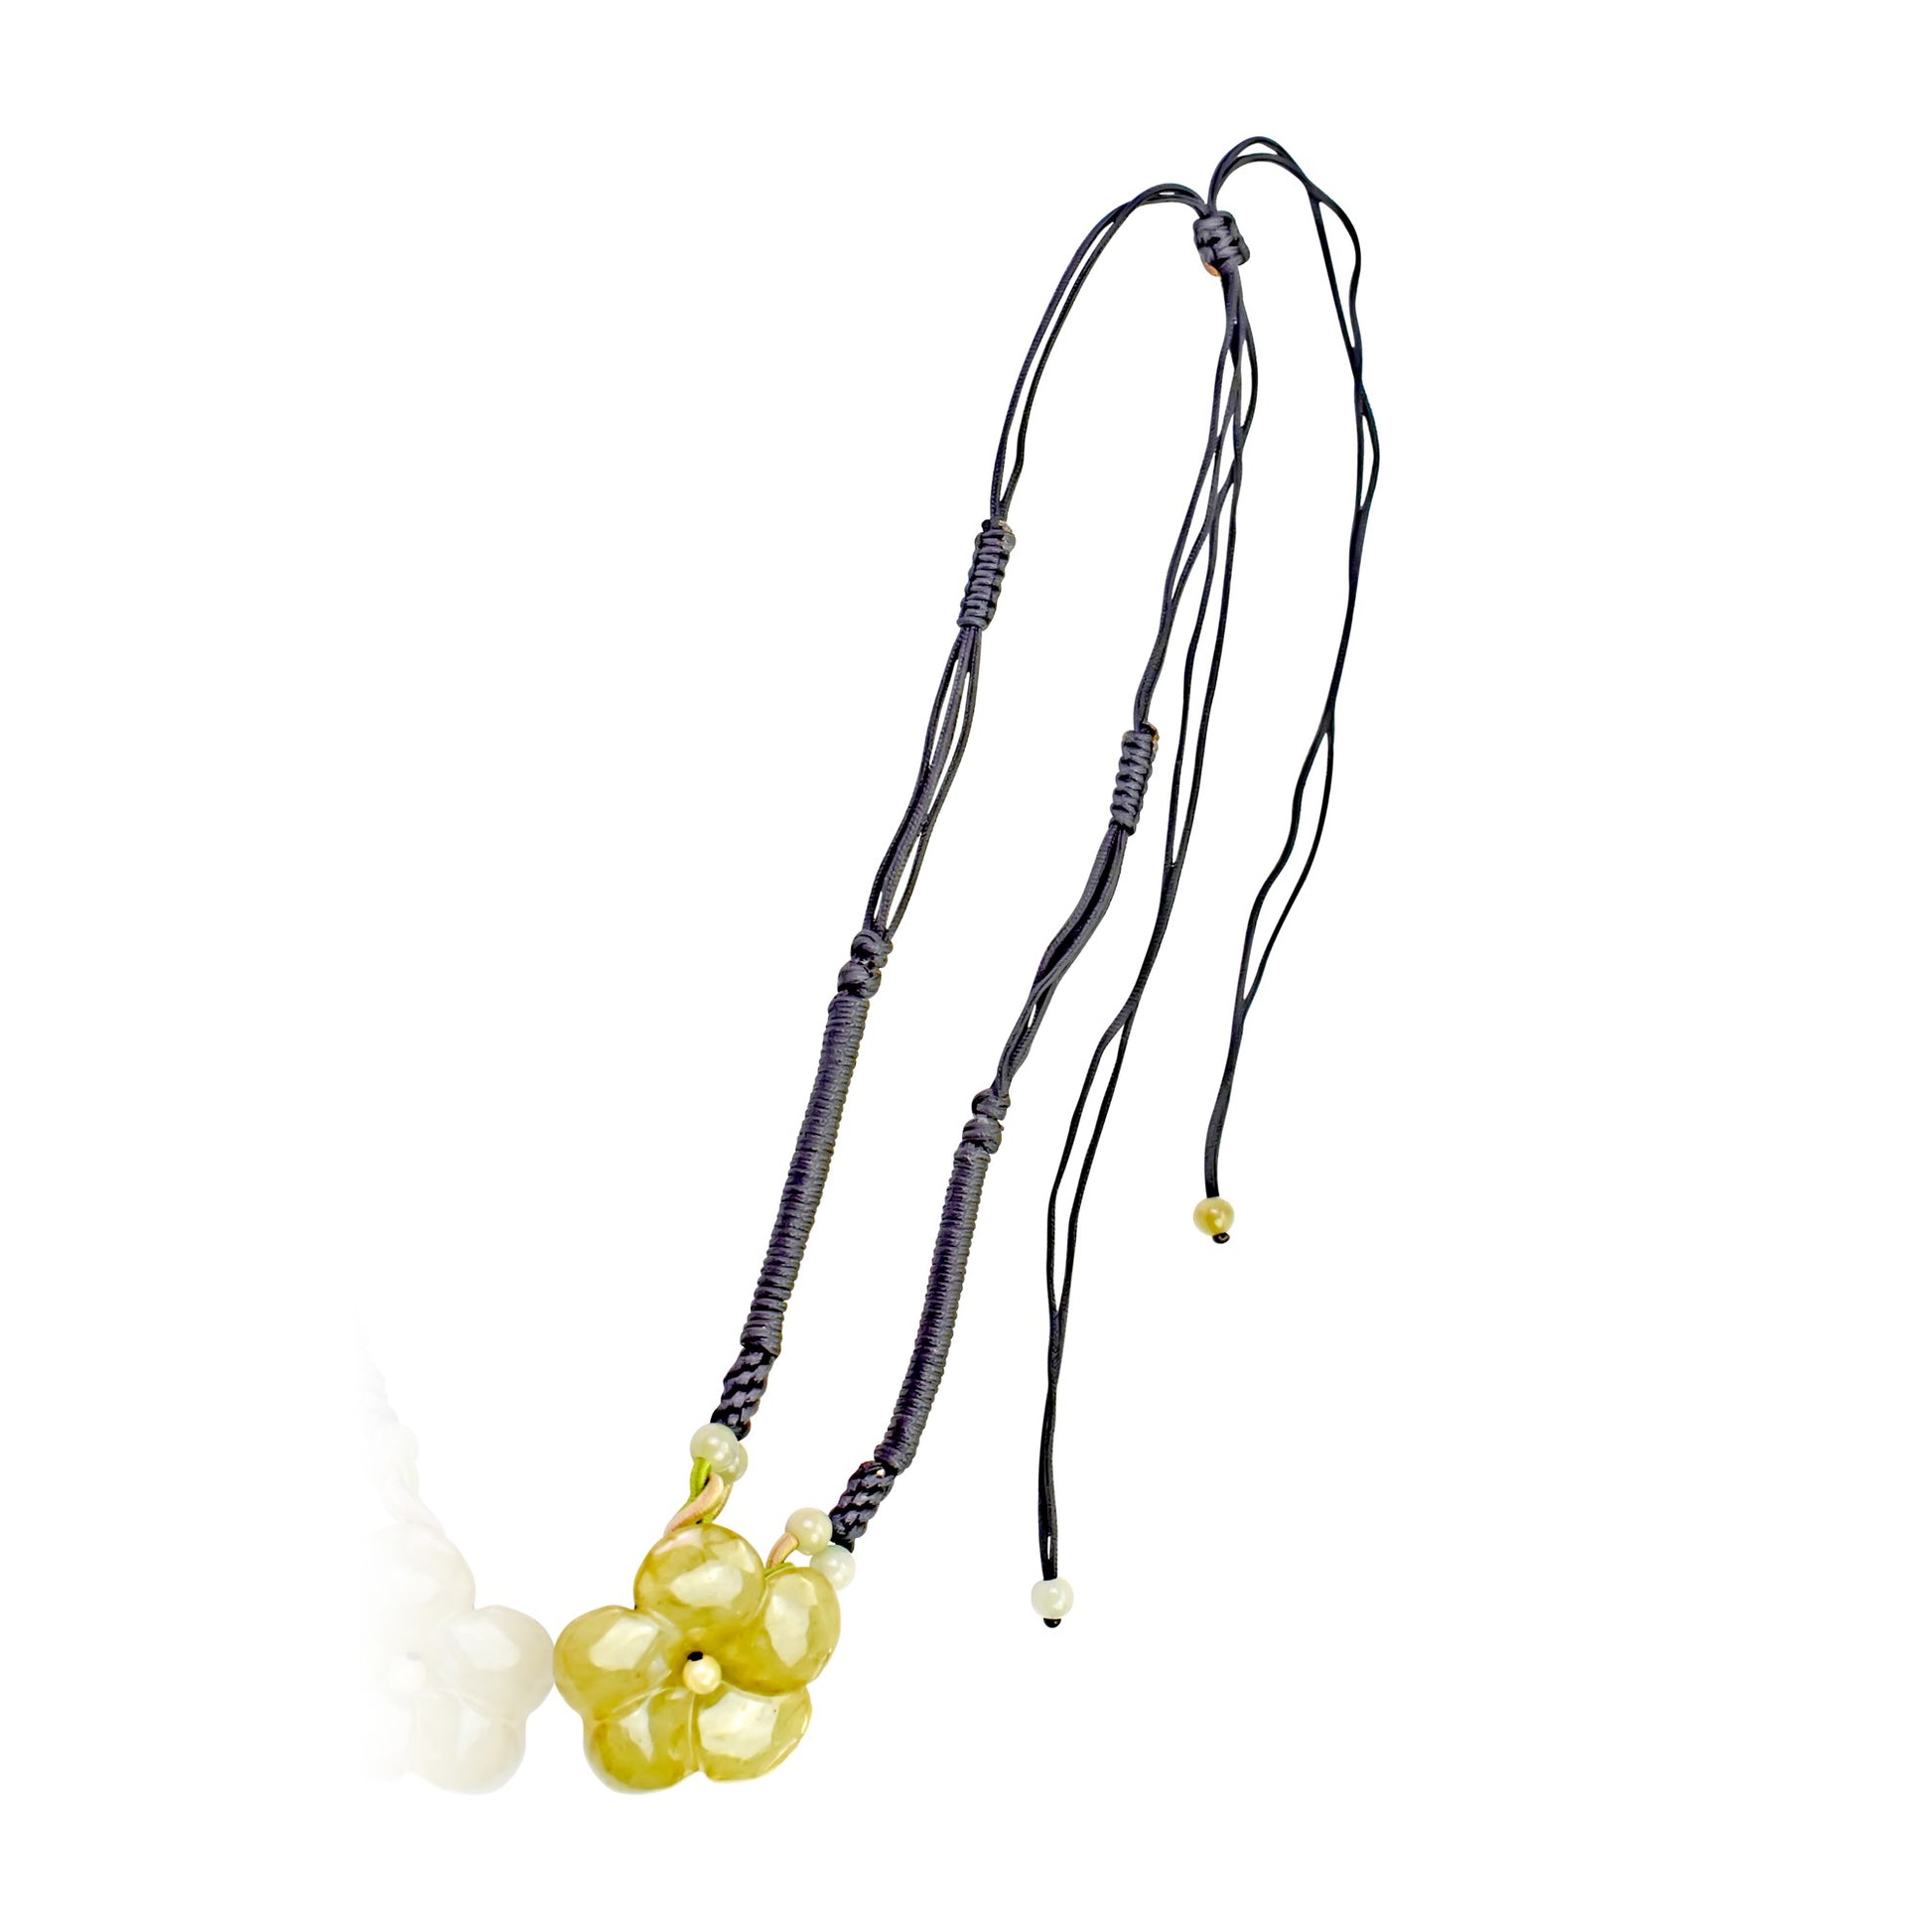 Get the Look You Crave with the Clematis Blossom Jade Necklace with Black Cord